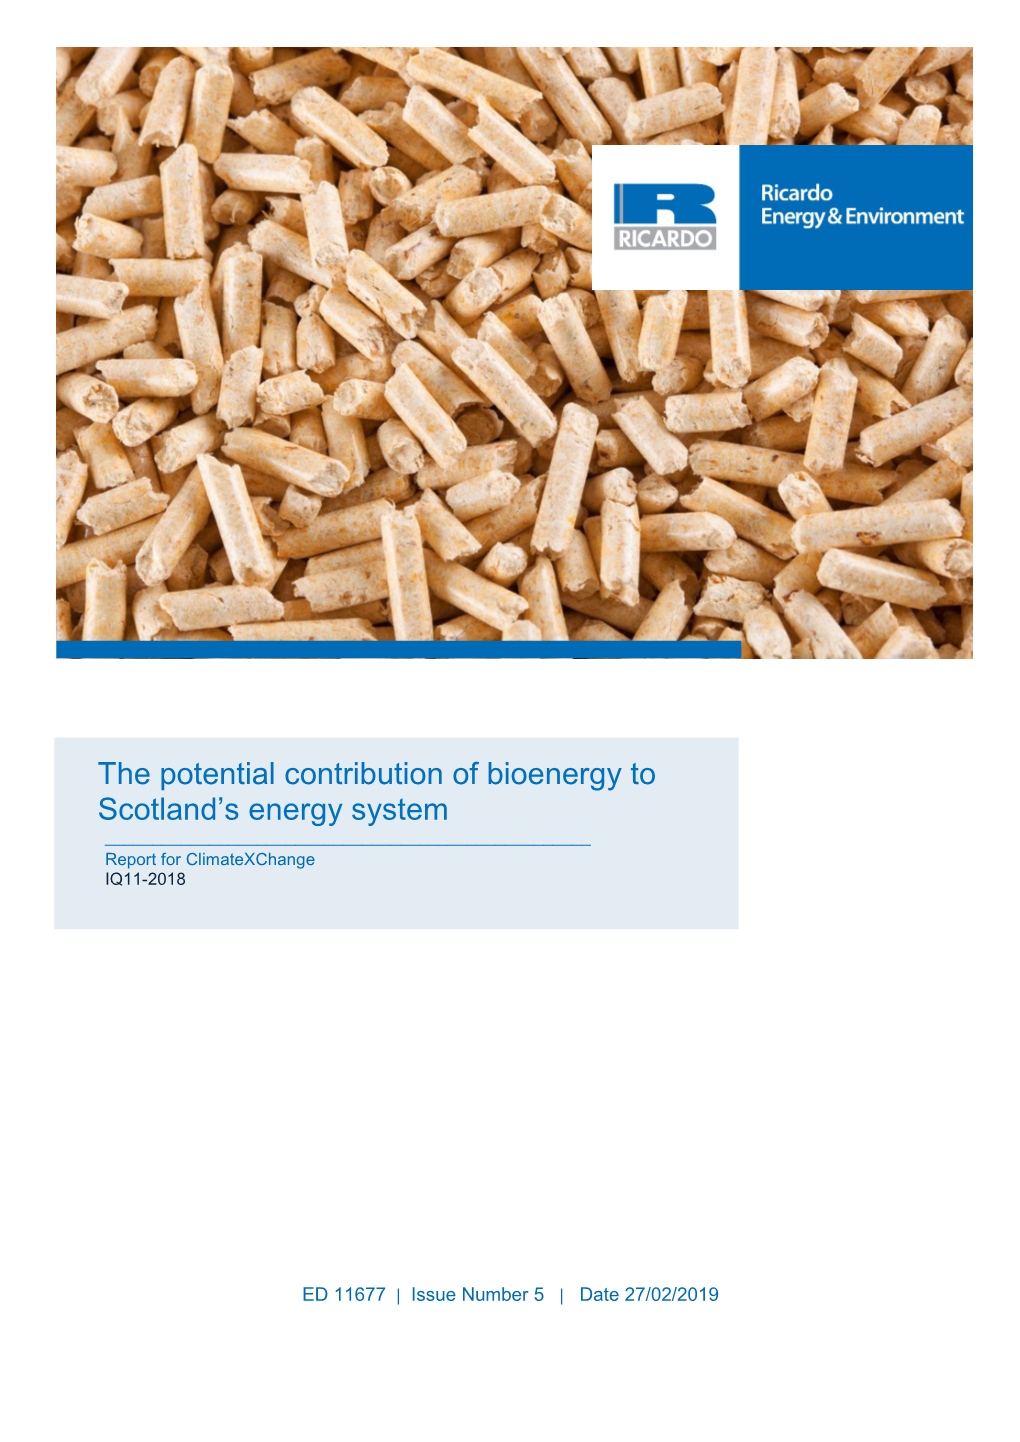 The Potential Contribution of Bioenergy to Scotland's Energy System